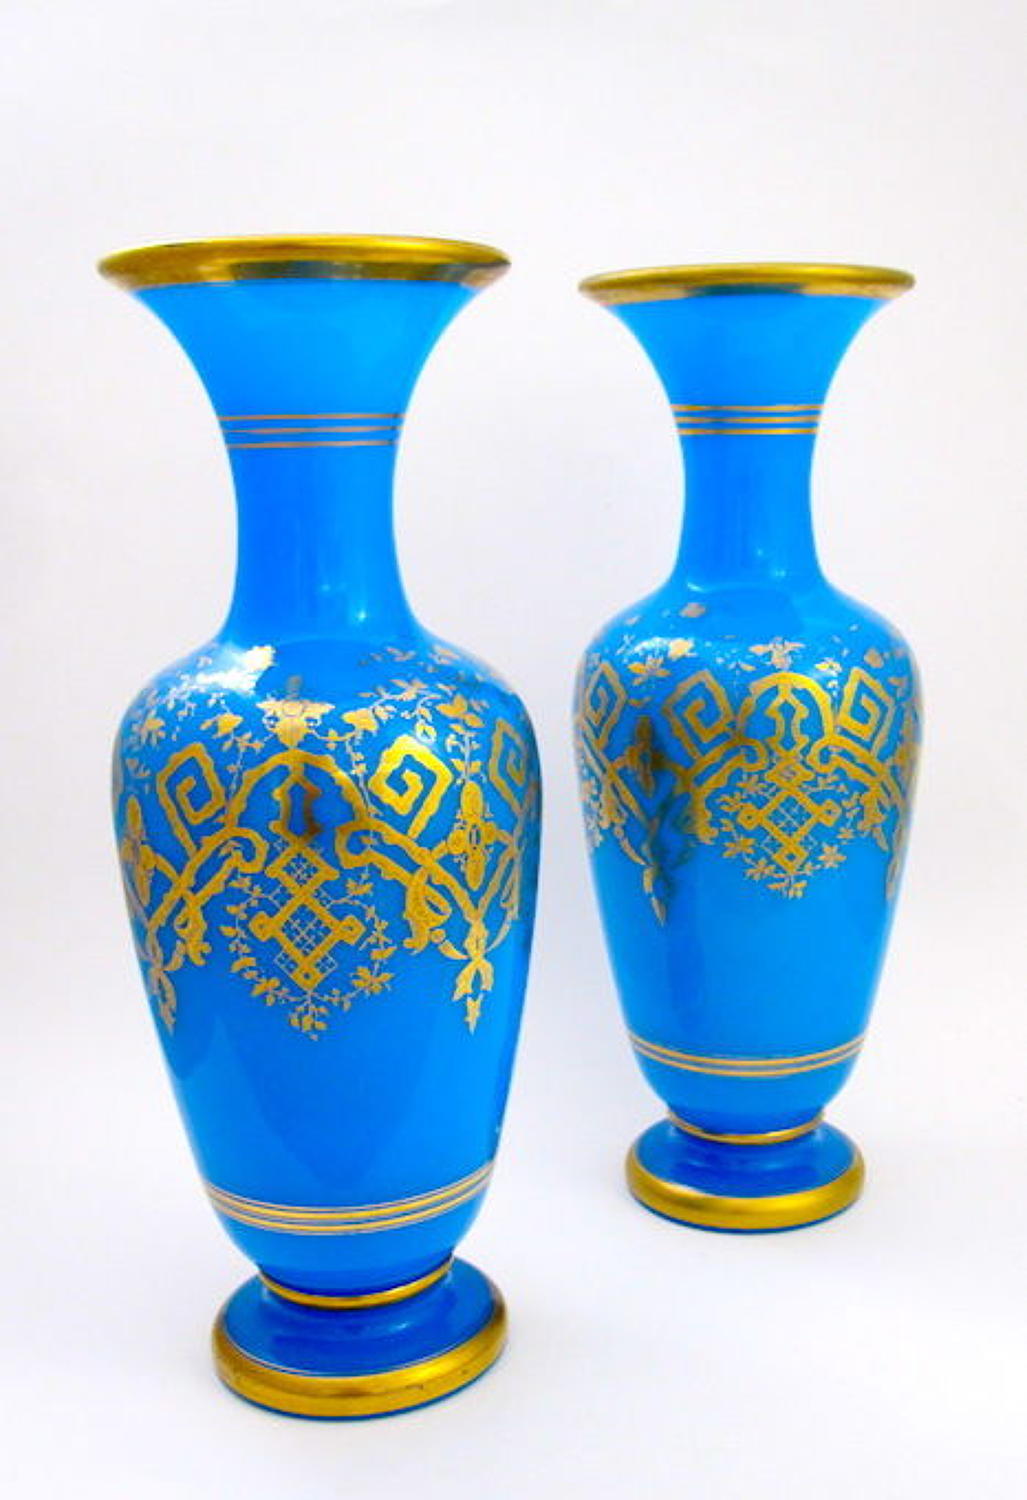 Pair of High Quality Antique BACCARAT Blue Opaline Glass Vases